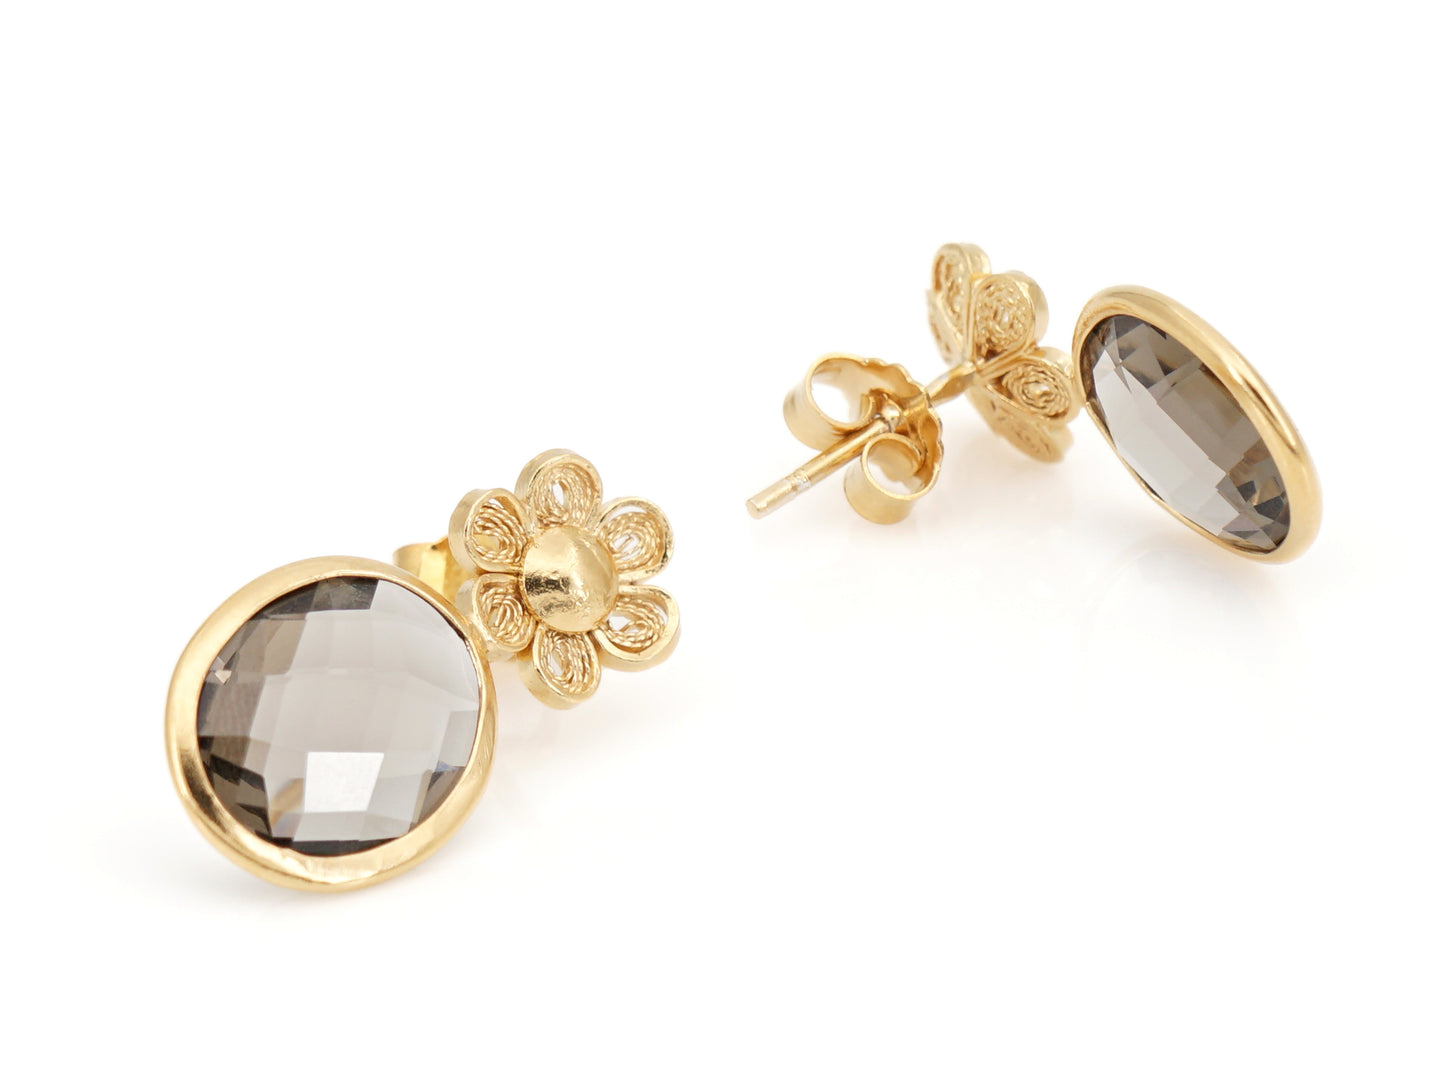 Flower and Brown Stone Earrings, Portuguese Filigree, Golden 925 Sterling Silver